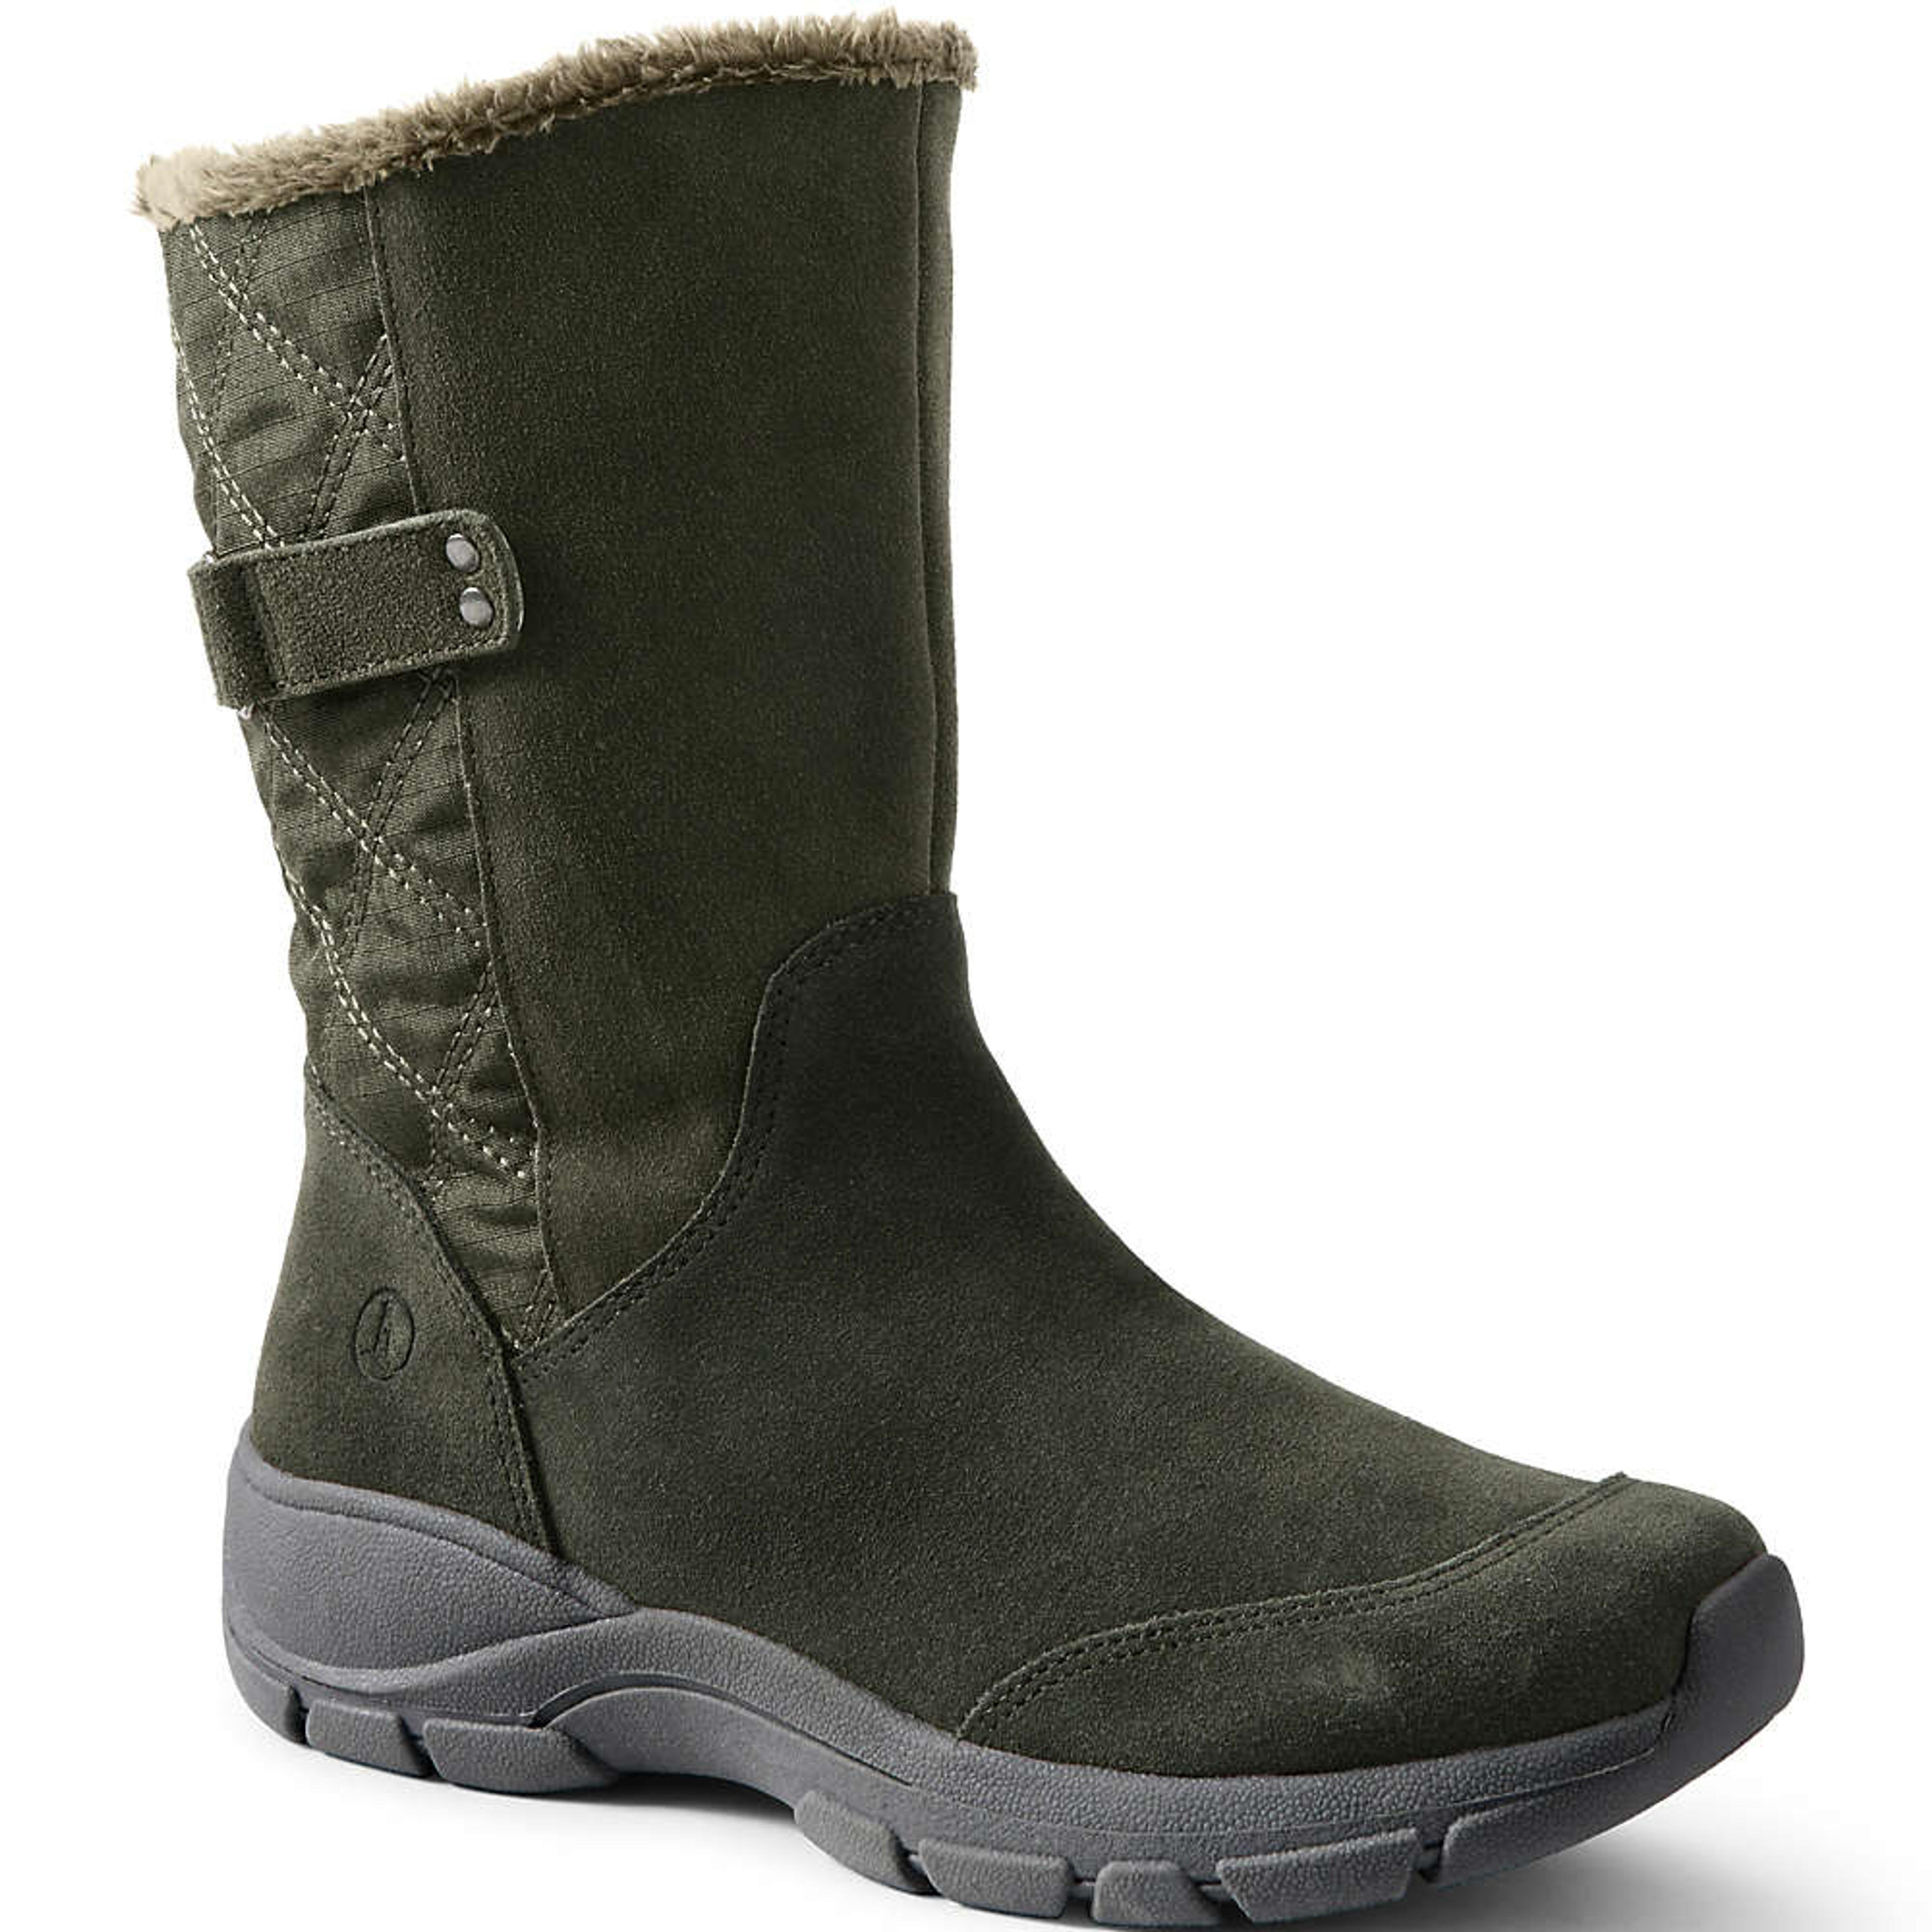 Women's All Weather Insulated Winter Snow Boots | Lands' End